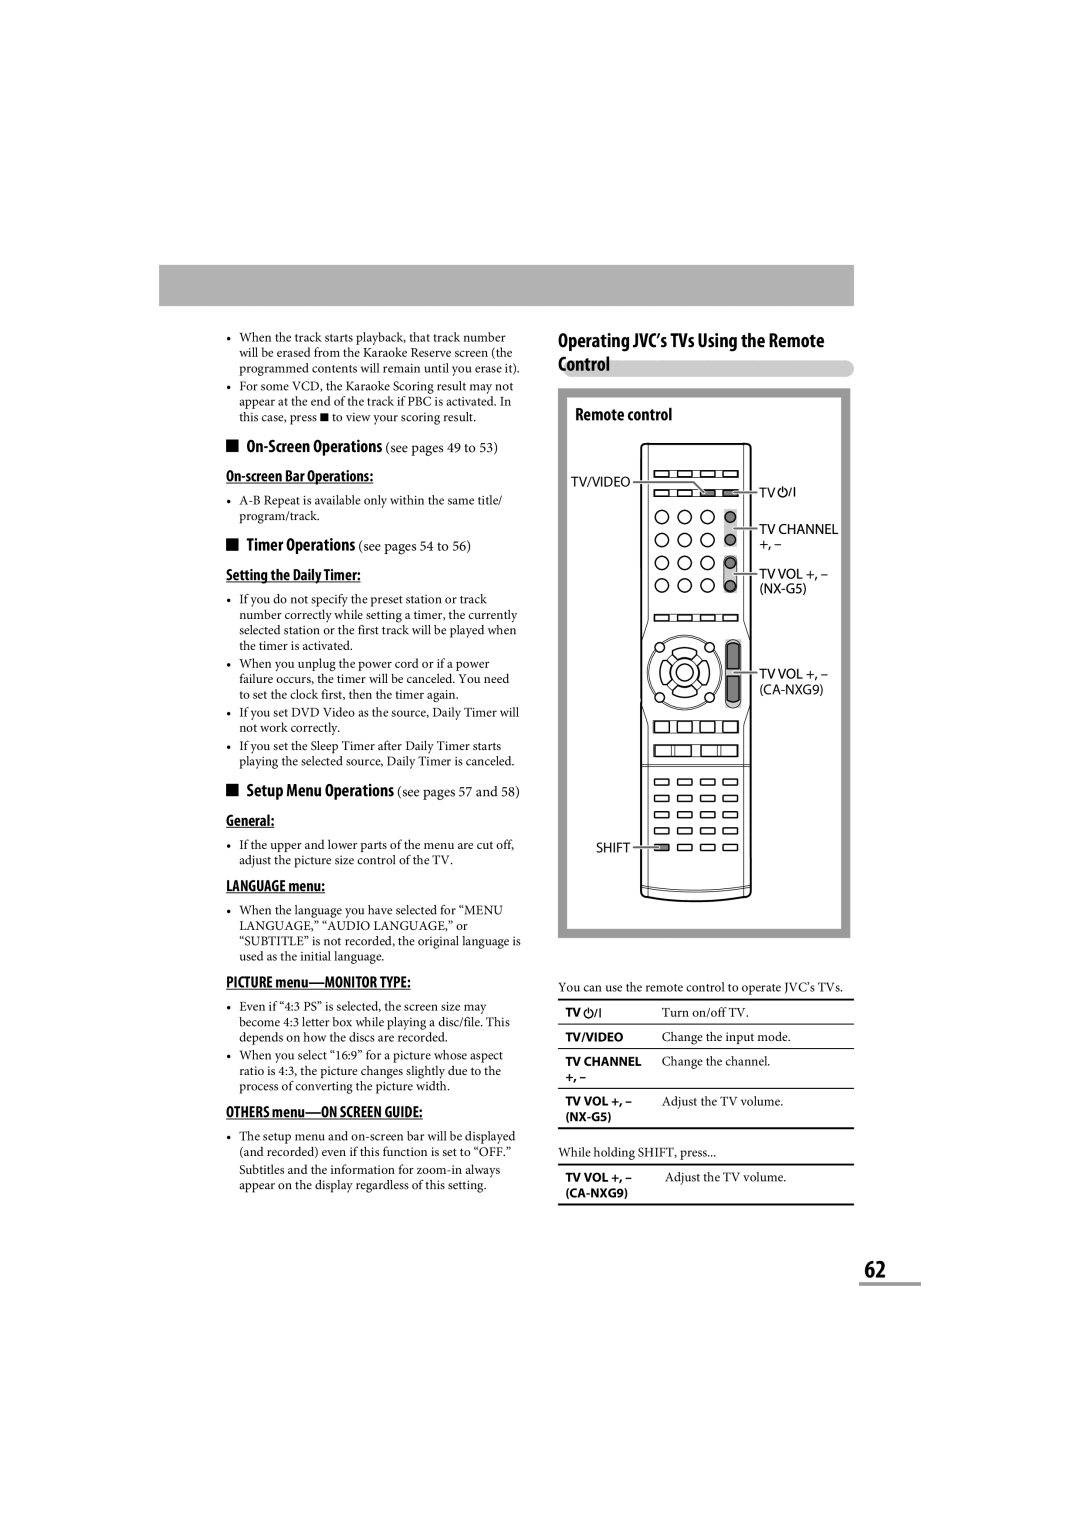 JVC CA-NXG9 manual On-ScreenOperations see pages 49 to, On-screenBar Operations, Setting the Daily Timer, LANGUAGE menu 